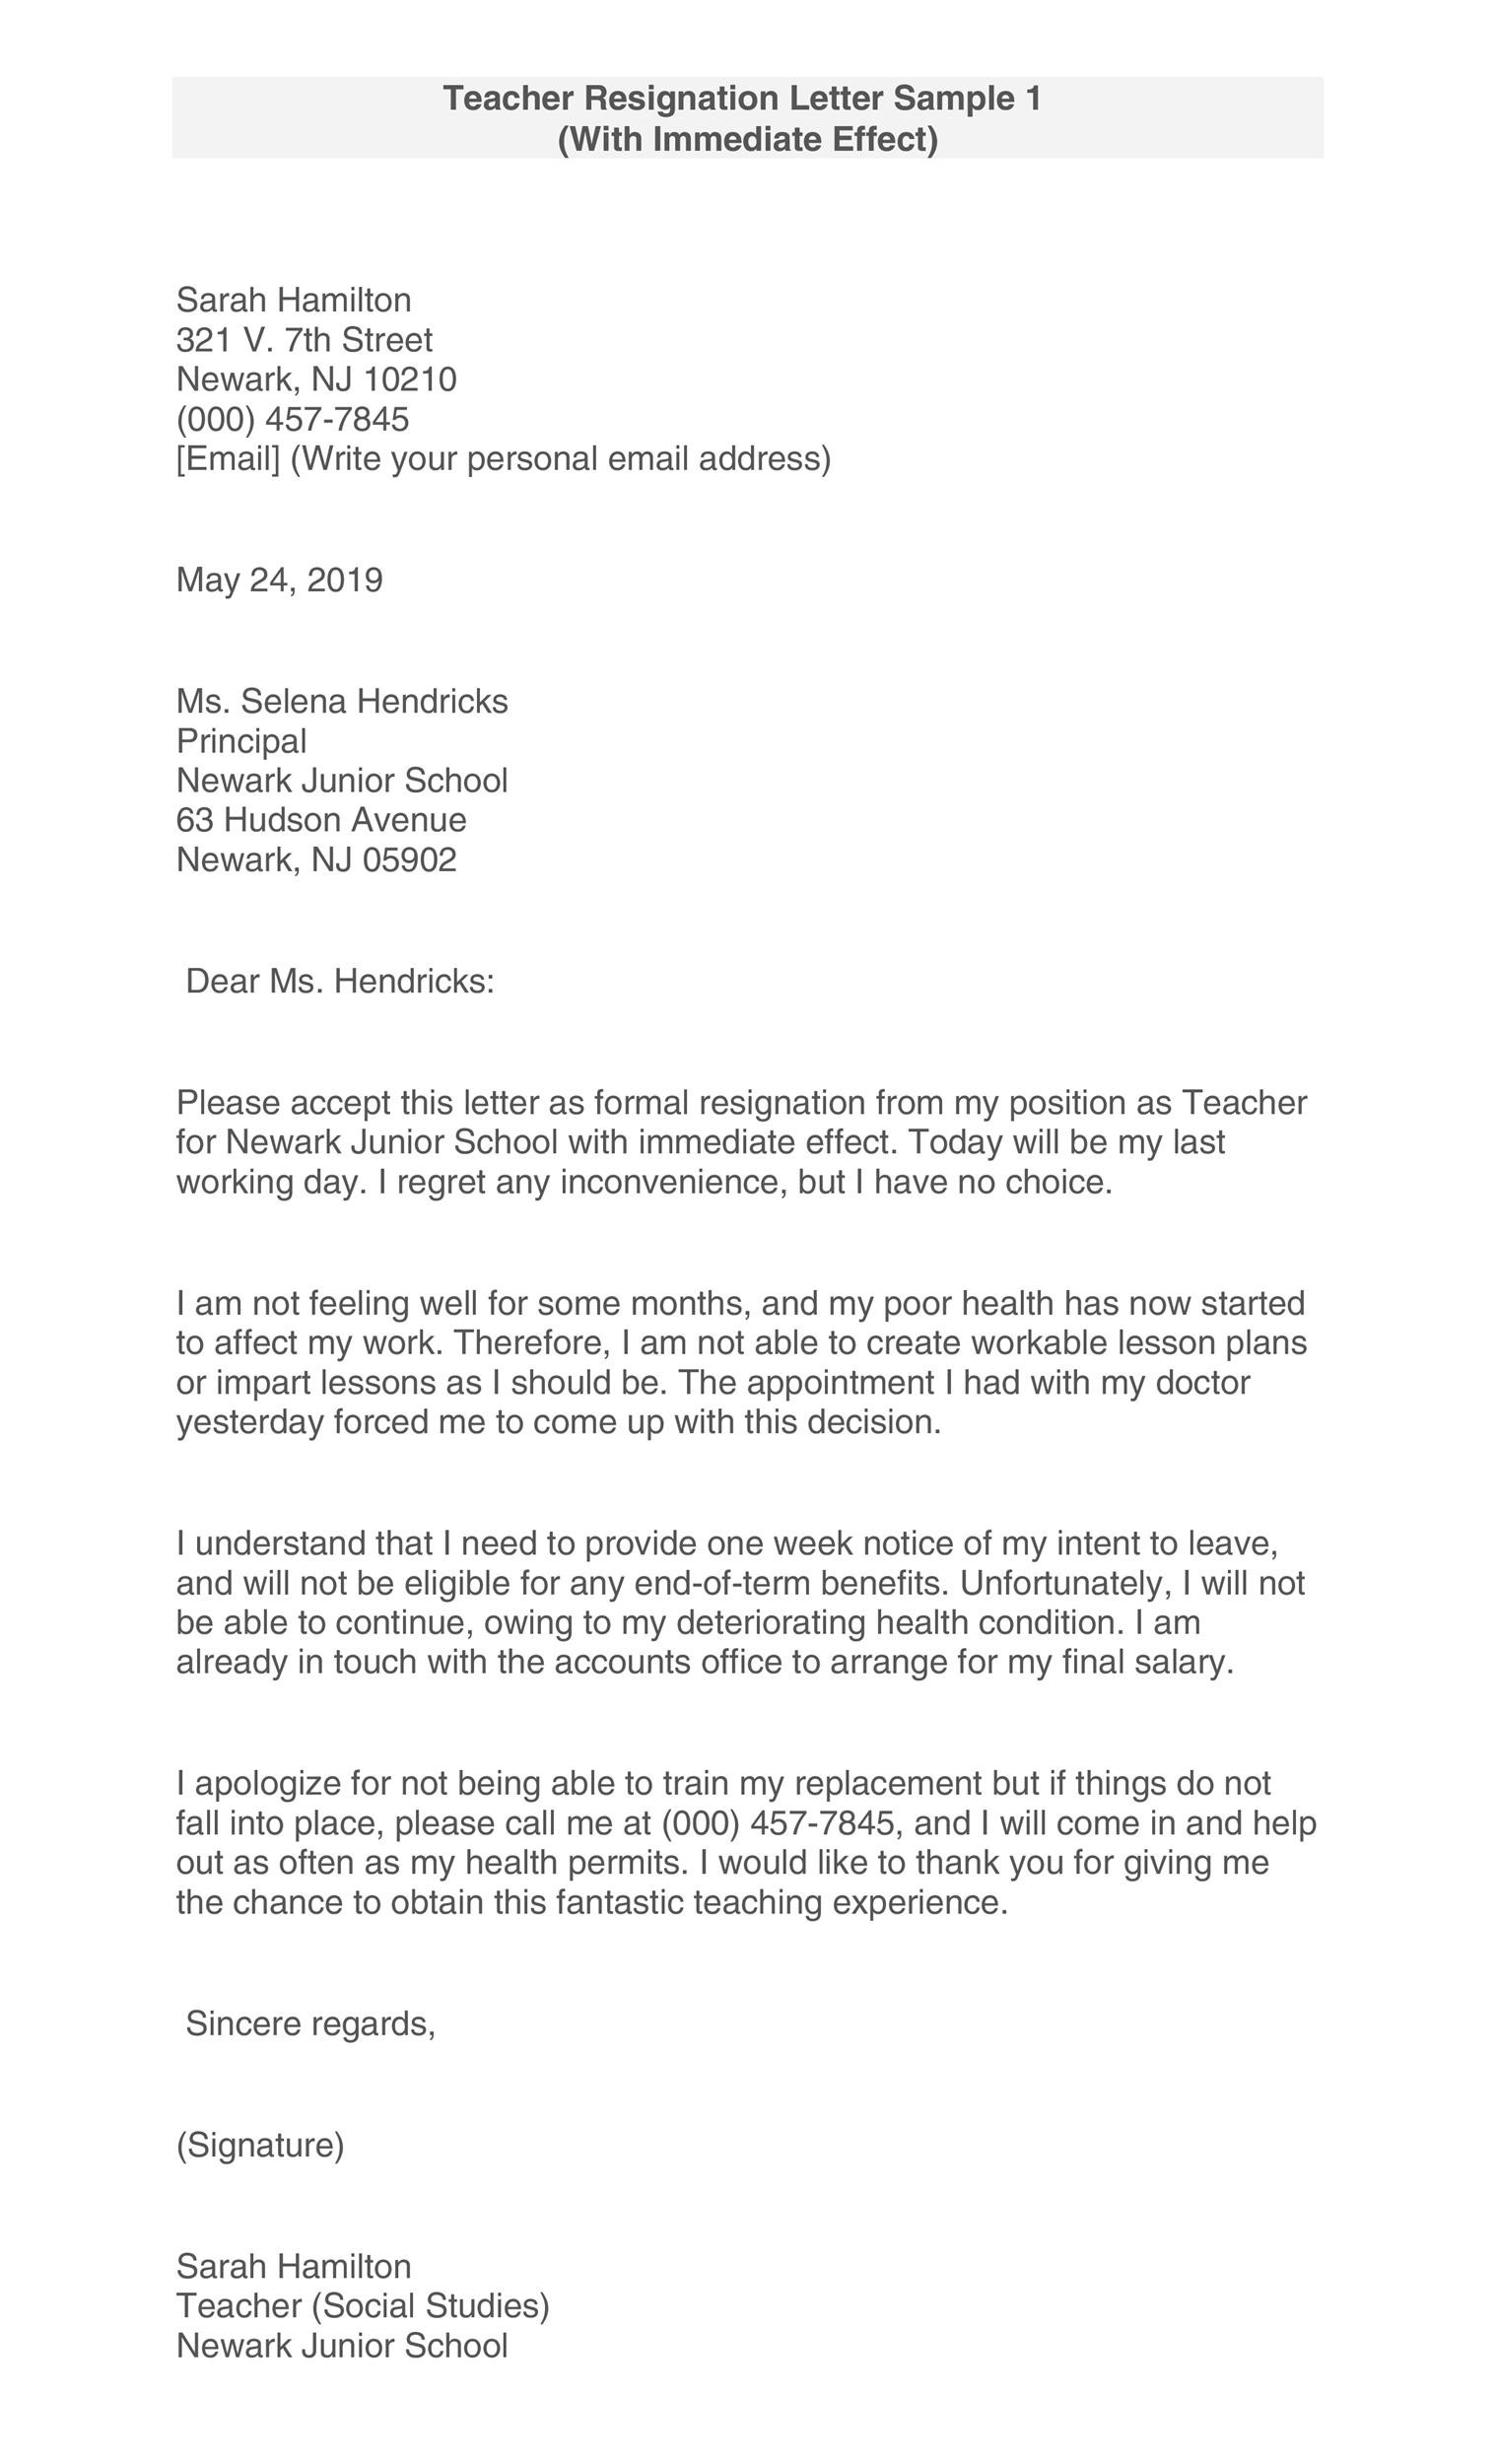 Immediate Resignation Letter Template from templatelab.com